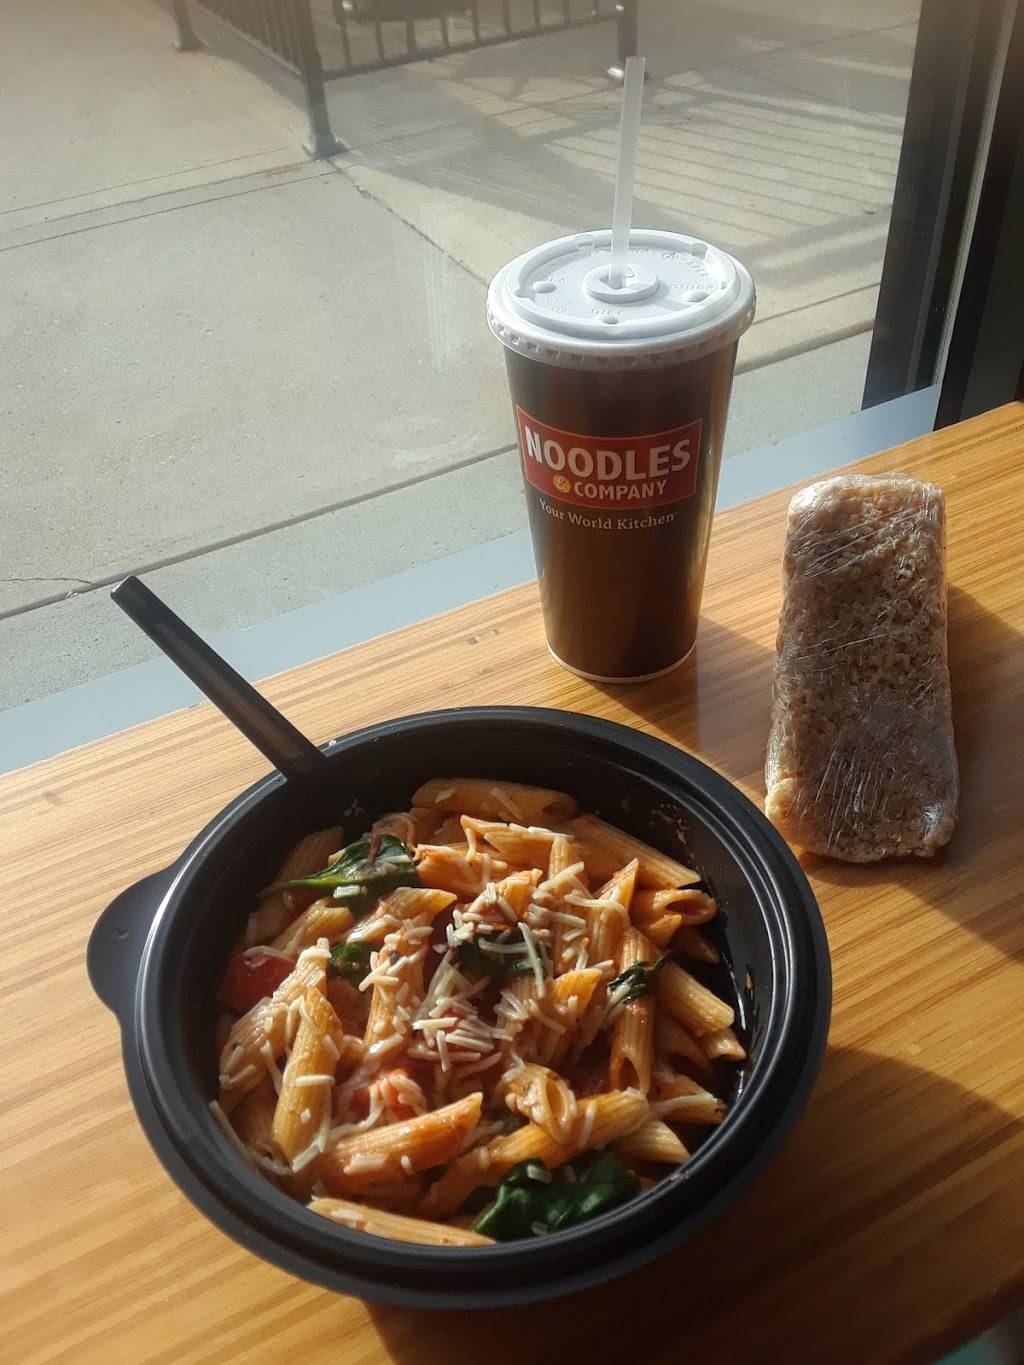 Noodles and Company | restaurant | 5032 N High St, Columbus, OH 43214, USA | 6144680600 OR +1 614-468-0600